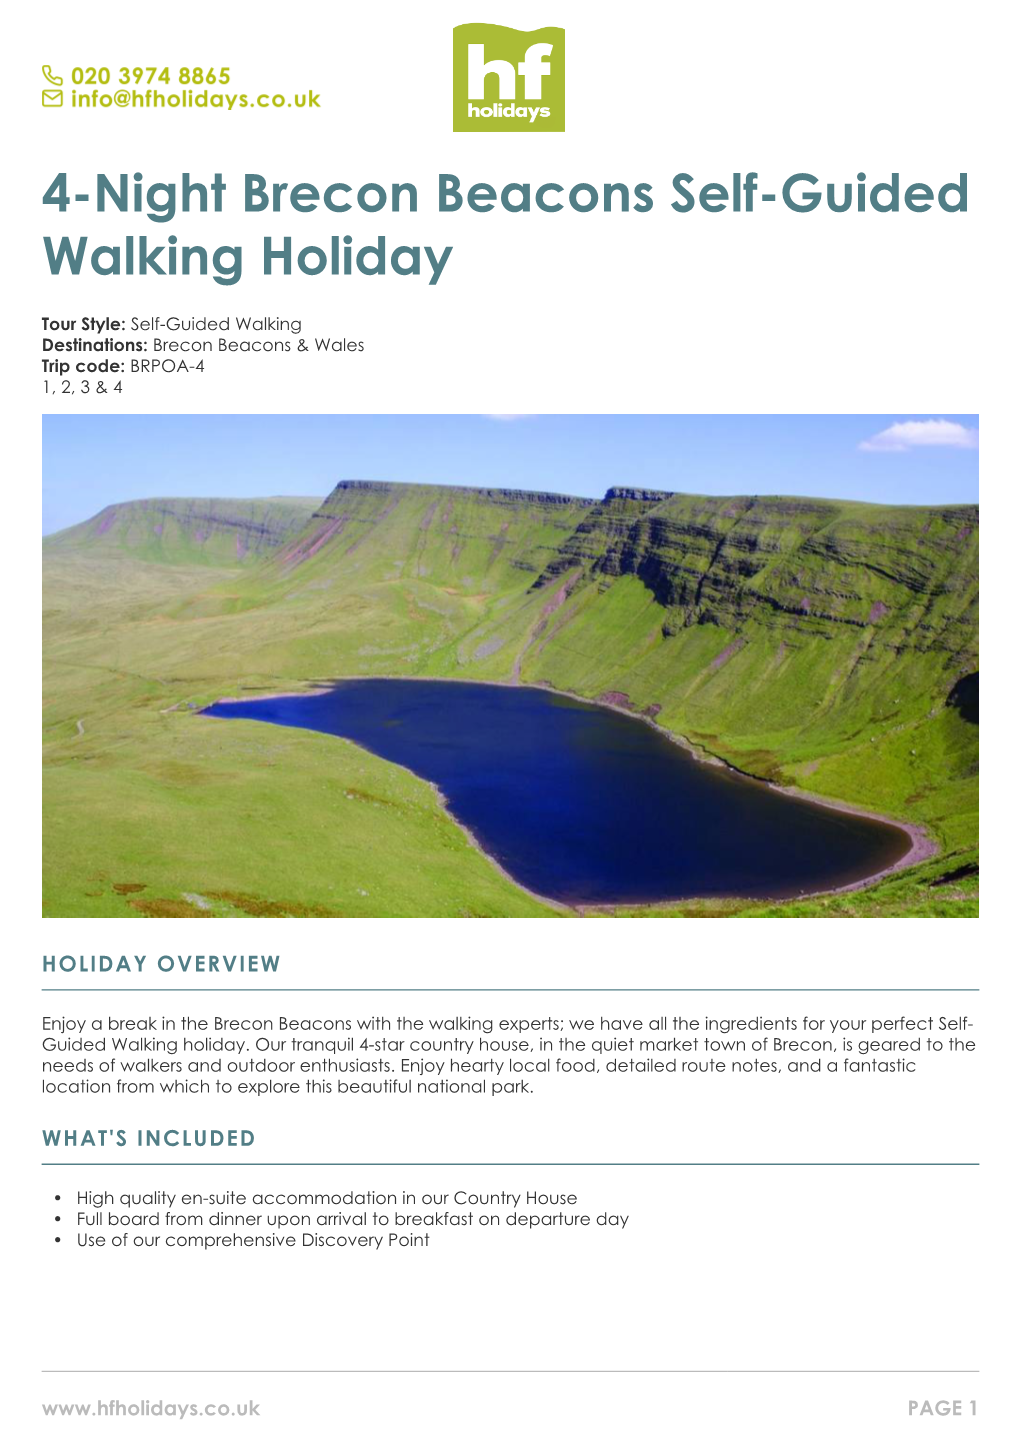 4-Night Brecon Beacons Self-Guided Walking Holiday